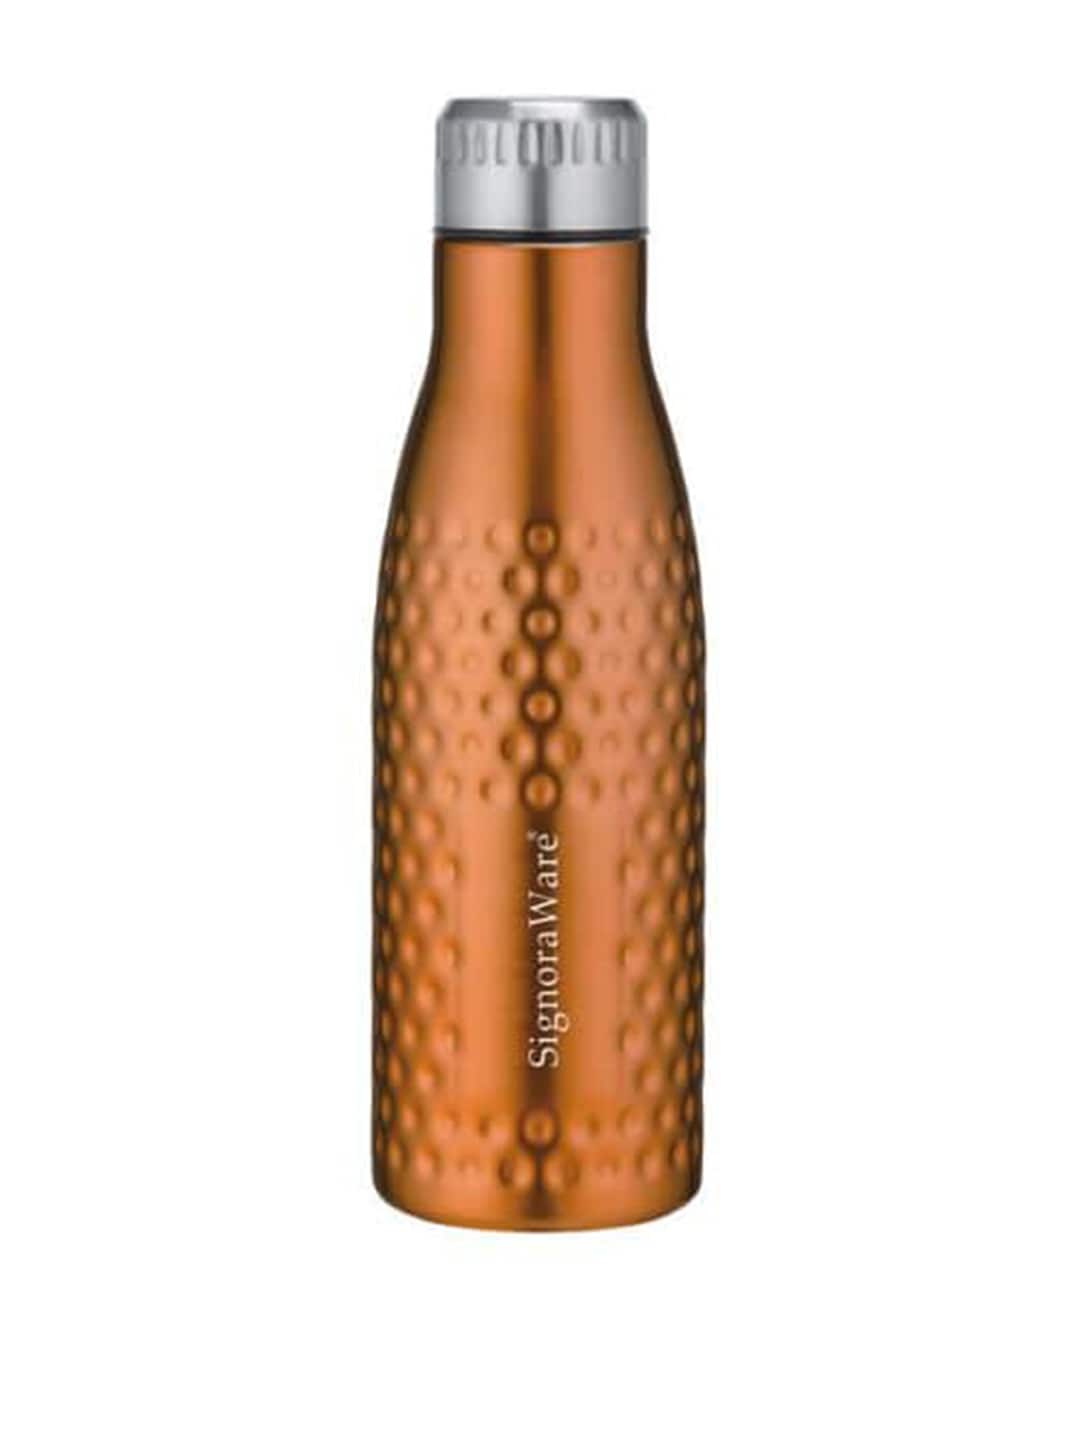 SignoraWare Copper Colored & Silver Textured Hammered Steel Water Bottle (1 Ltr) Price in India